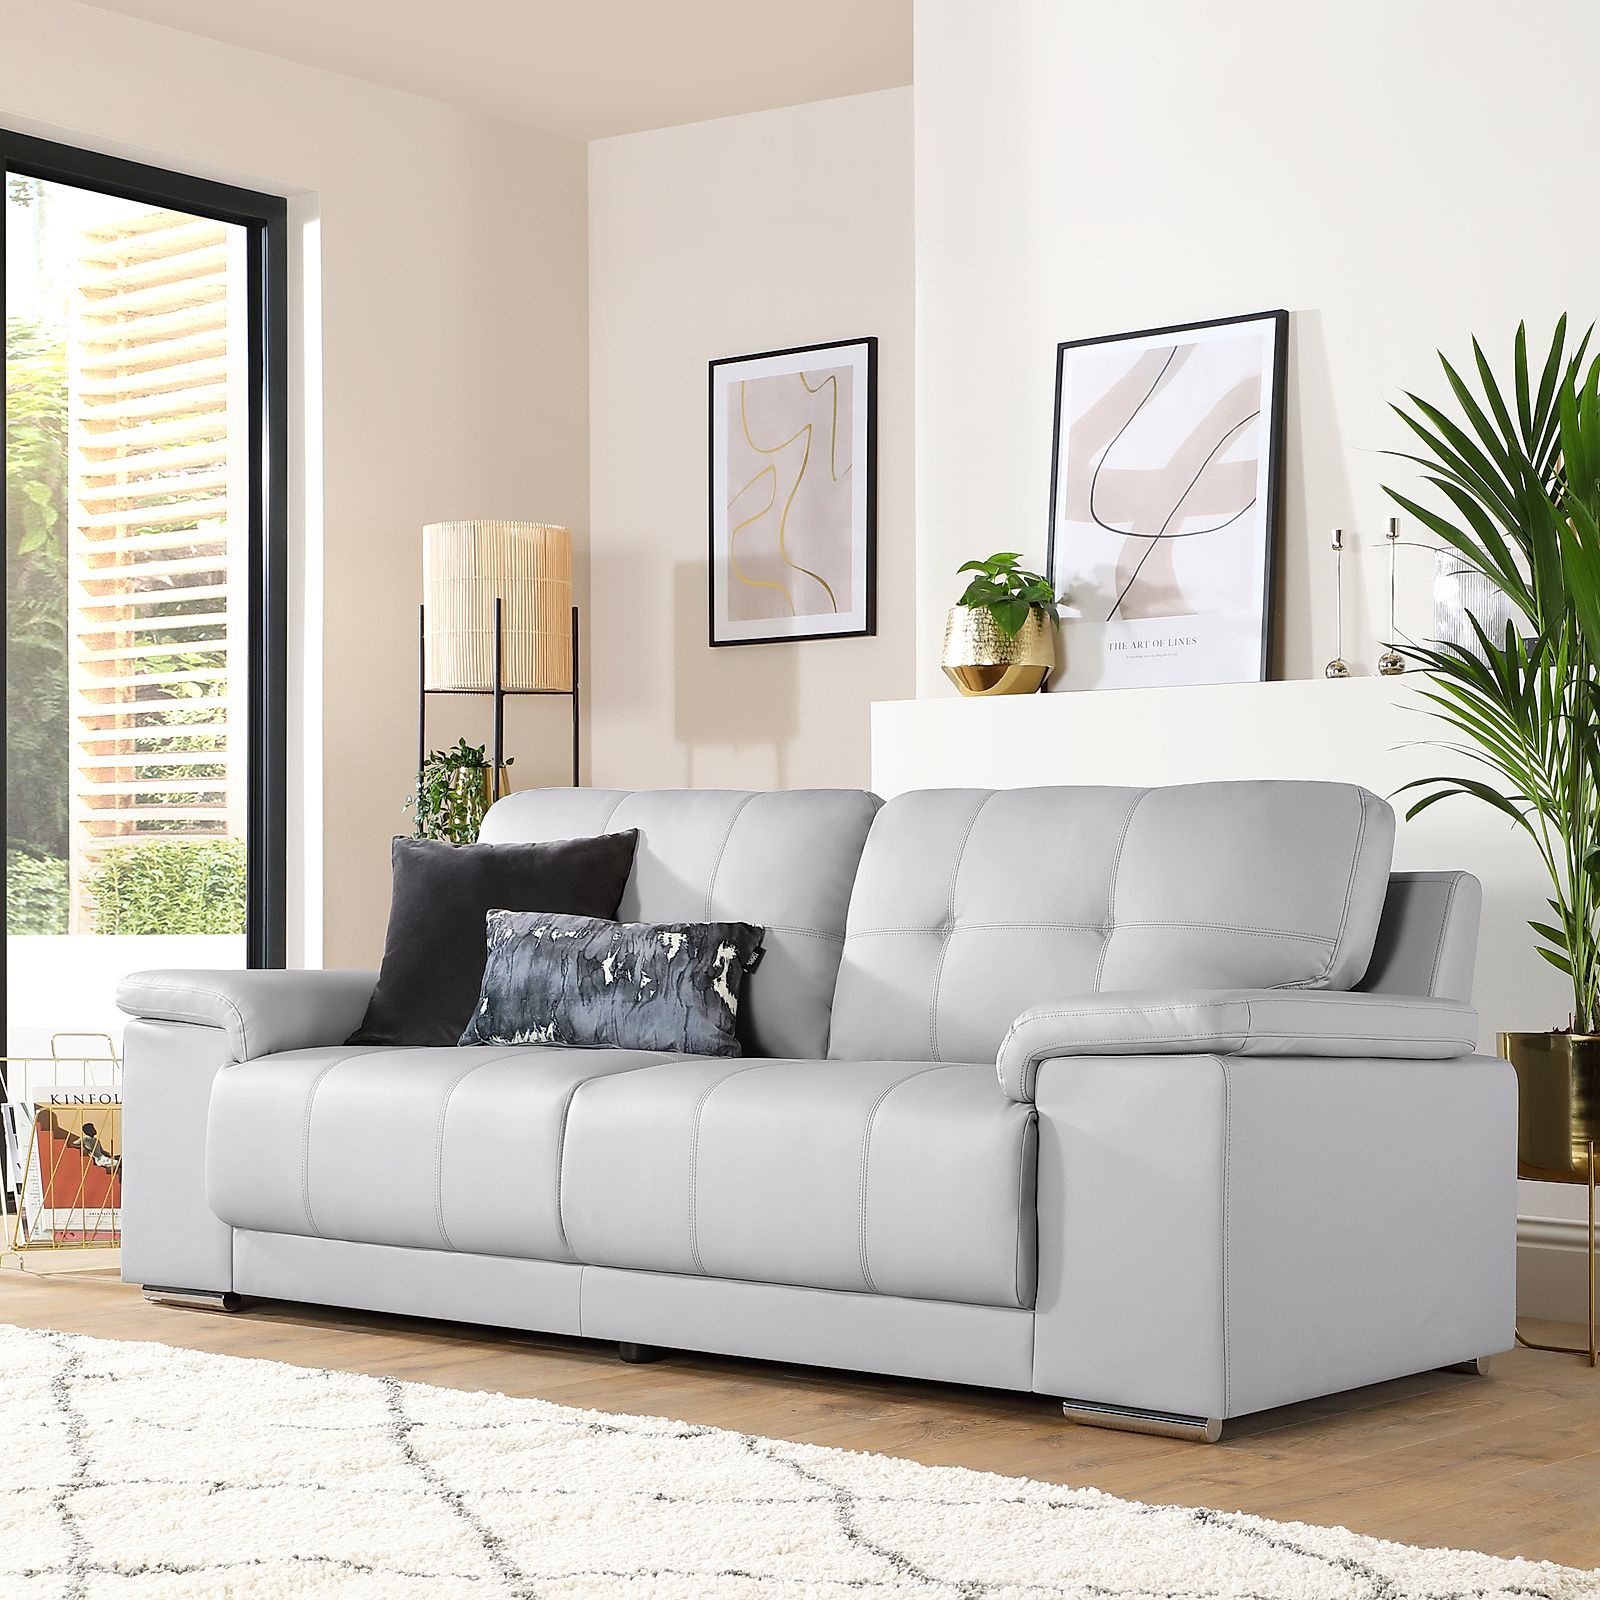 Kansas Light Grey Leather 3 Seater Sofa | Furniture Choice With Regard To Sofas In Light Gray (View 4 of 22)